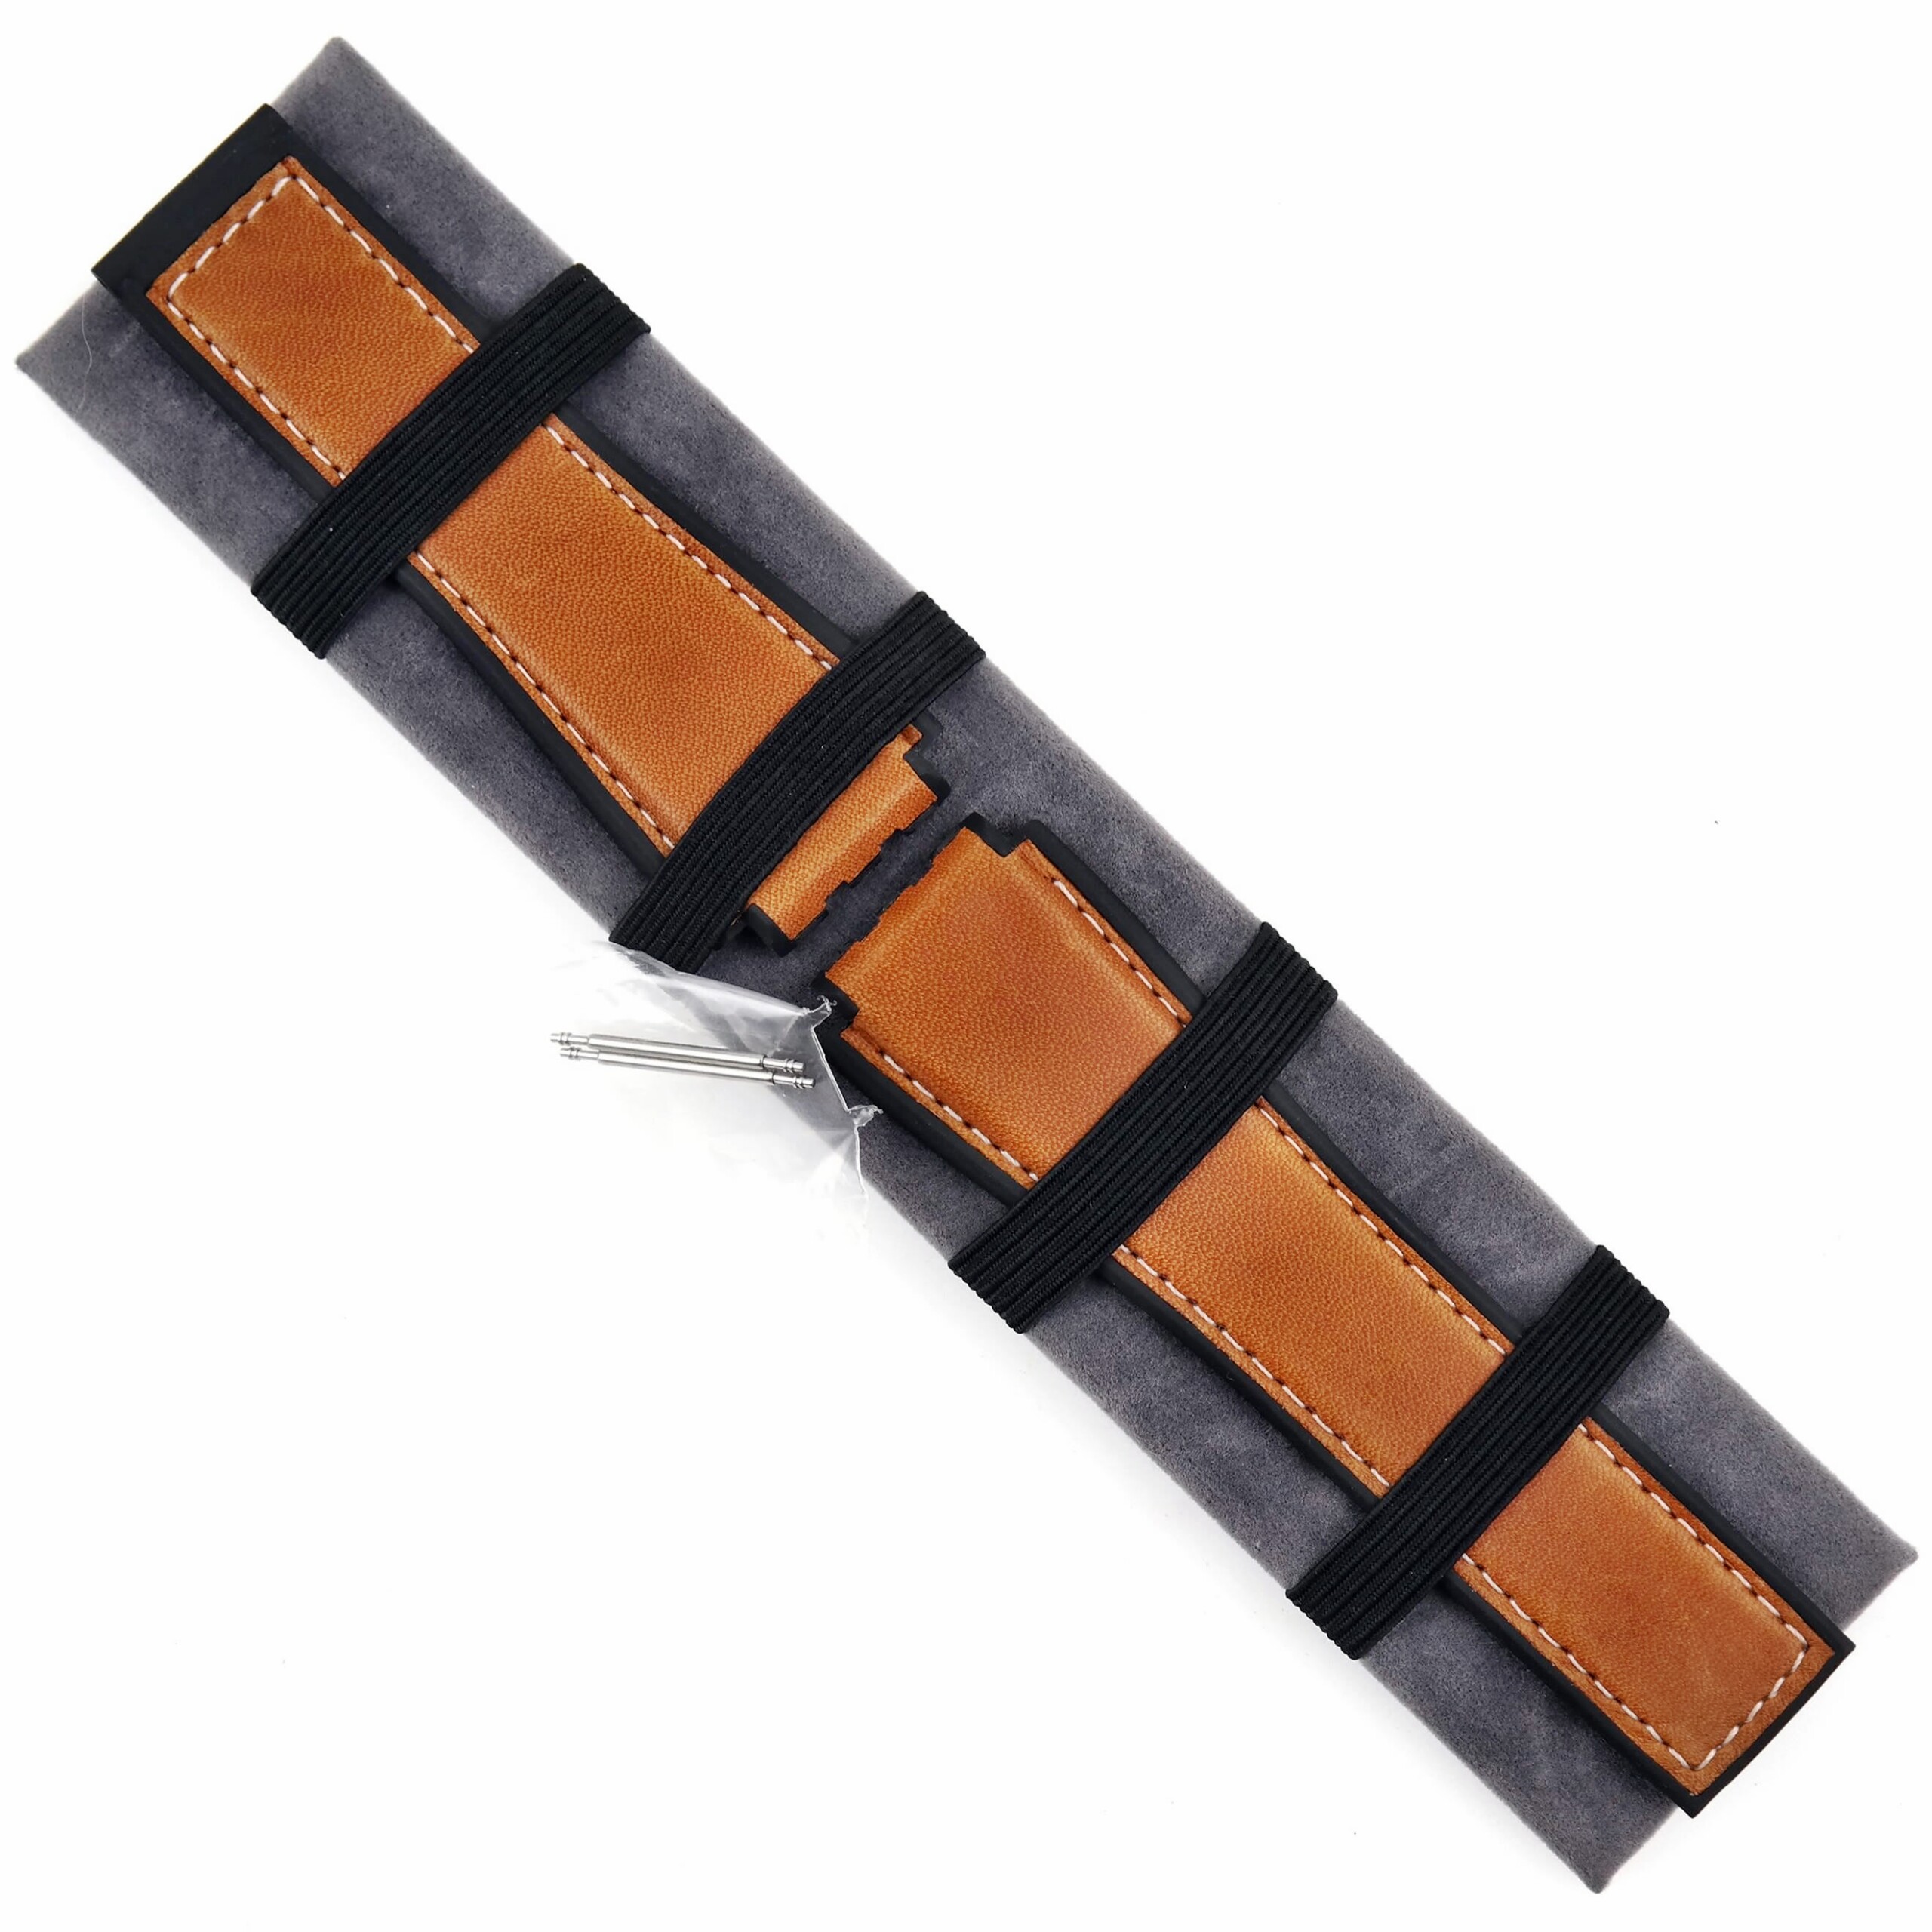 Authentic TAG Heuer Watch Strap - Carrera Cal. Heuer 01/02 - 22 mm - FT6121